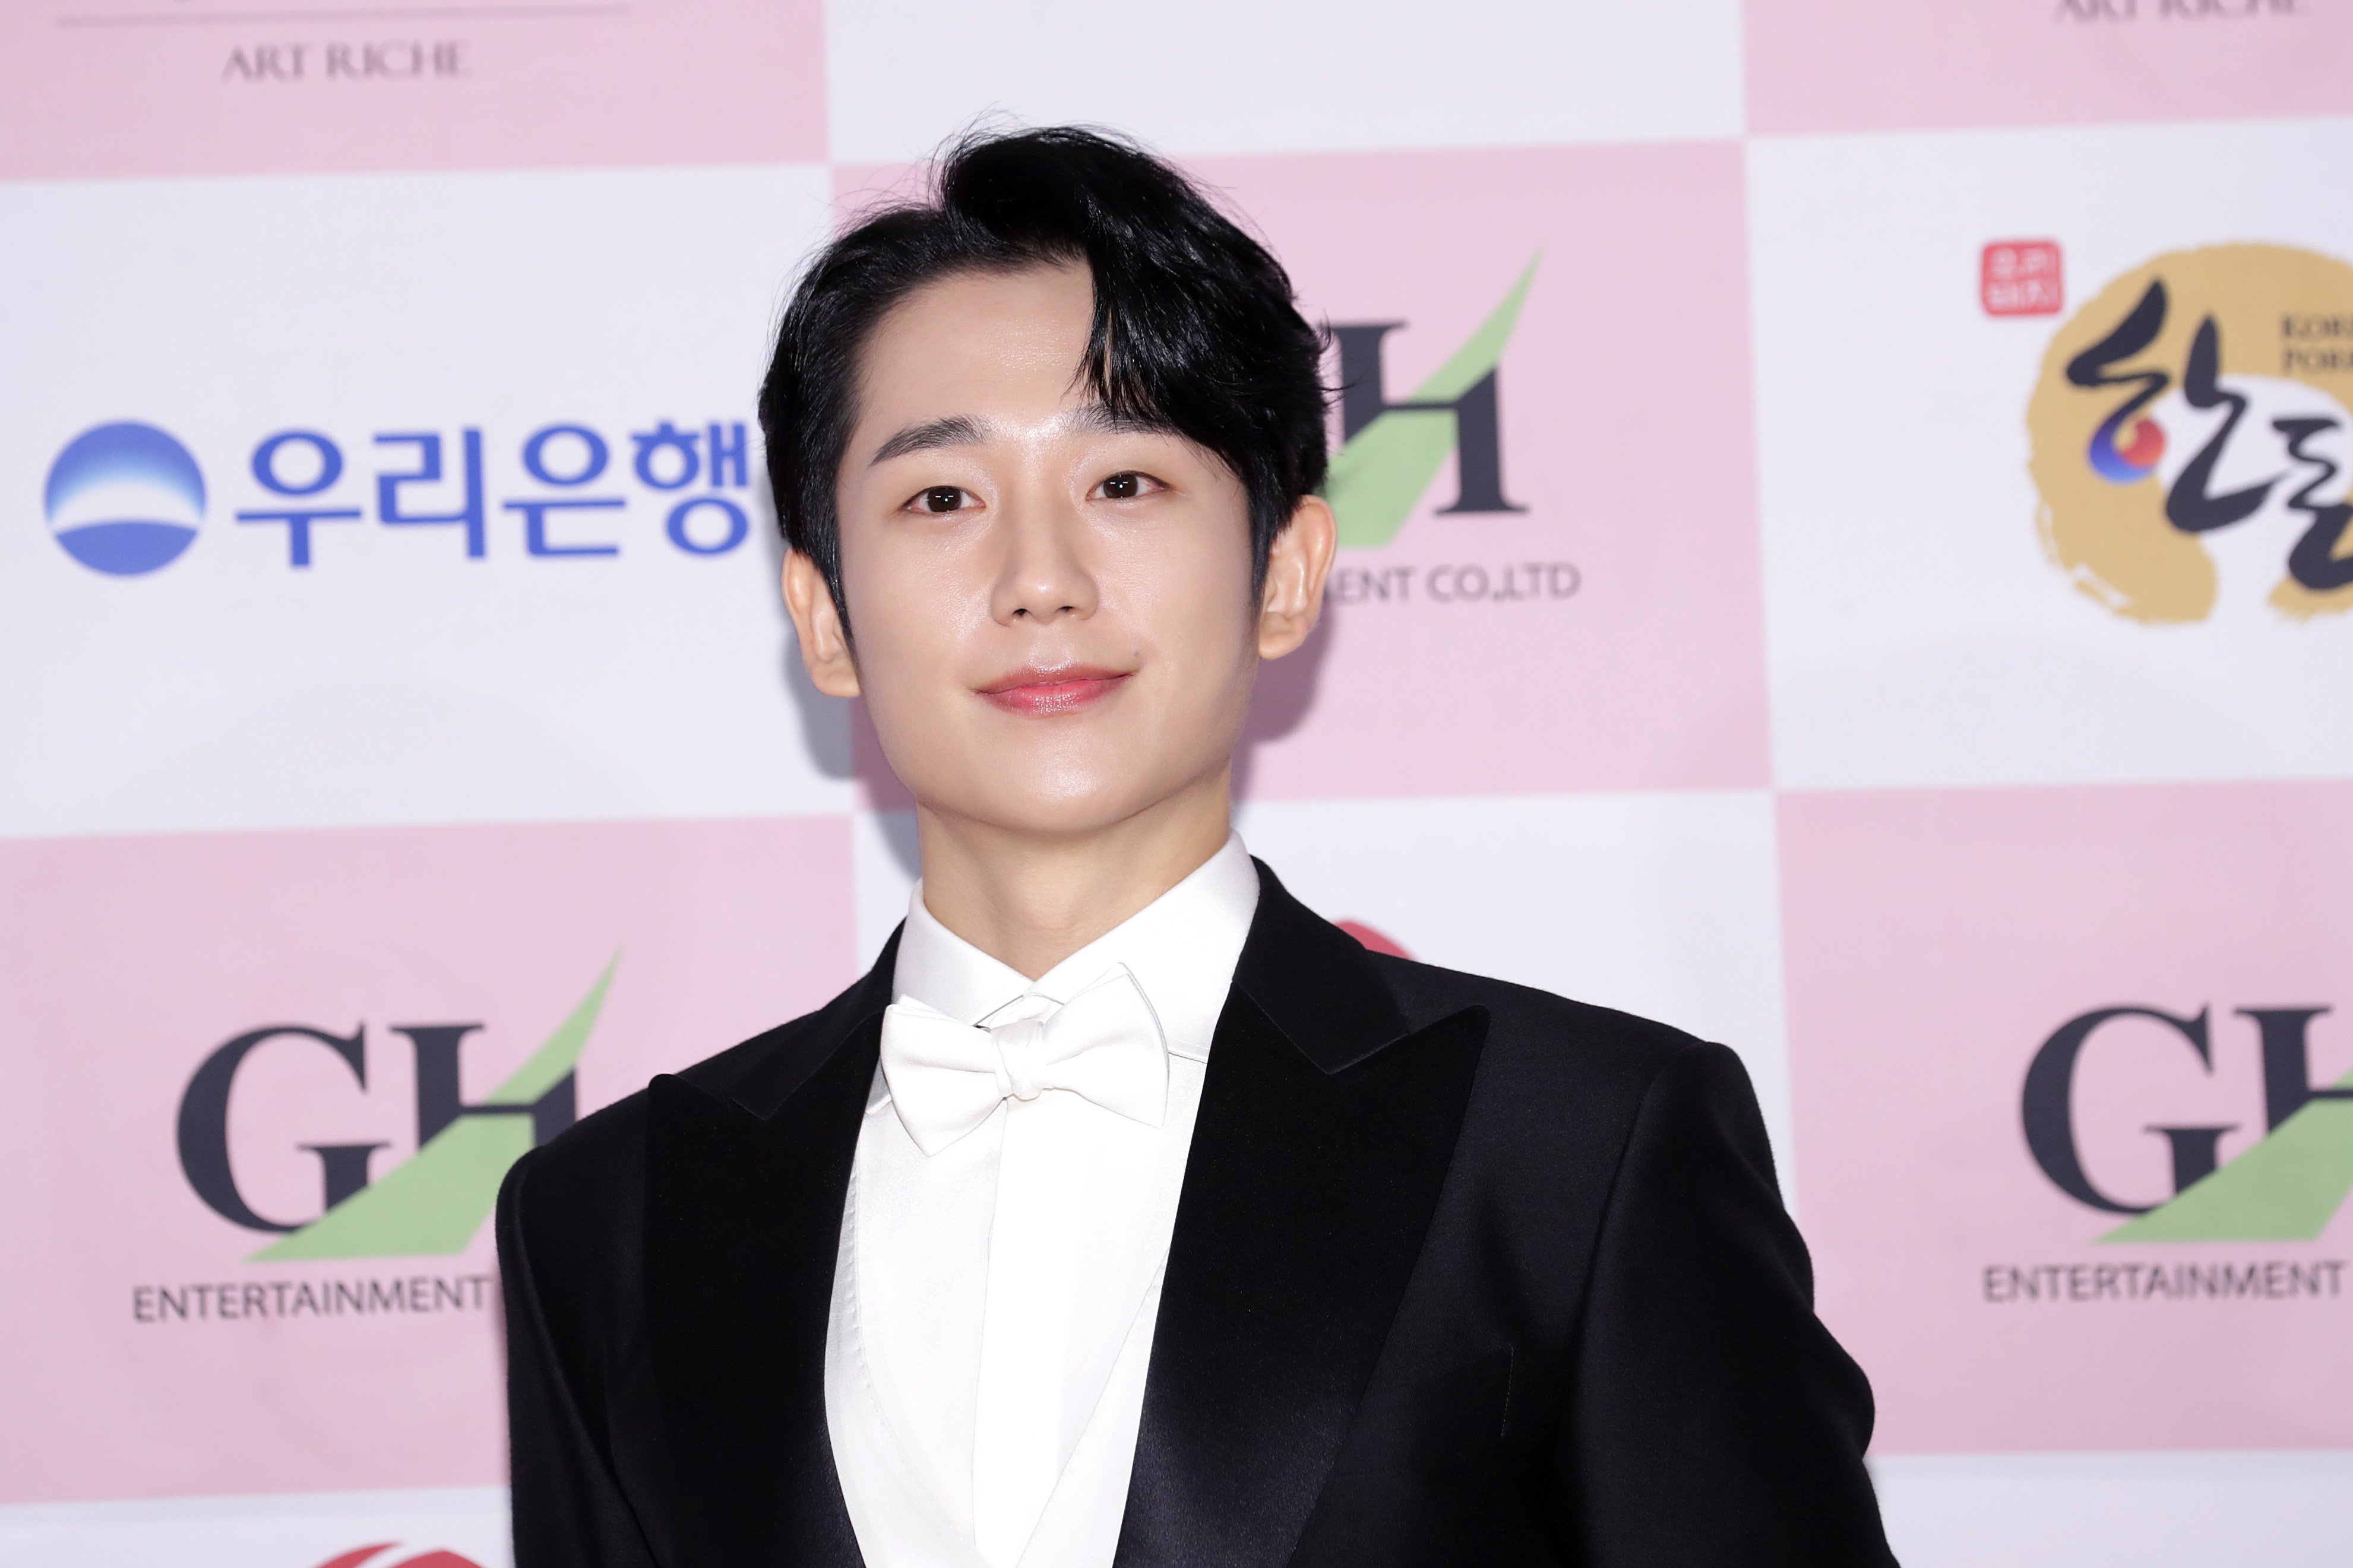 Jung Hae-In 'D.P.' Netflix K-drama wearing tux at awards show